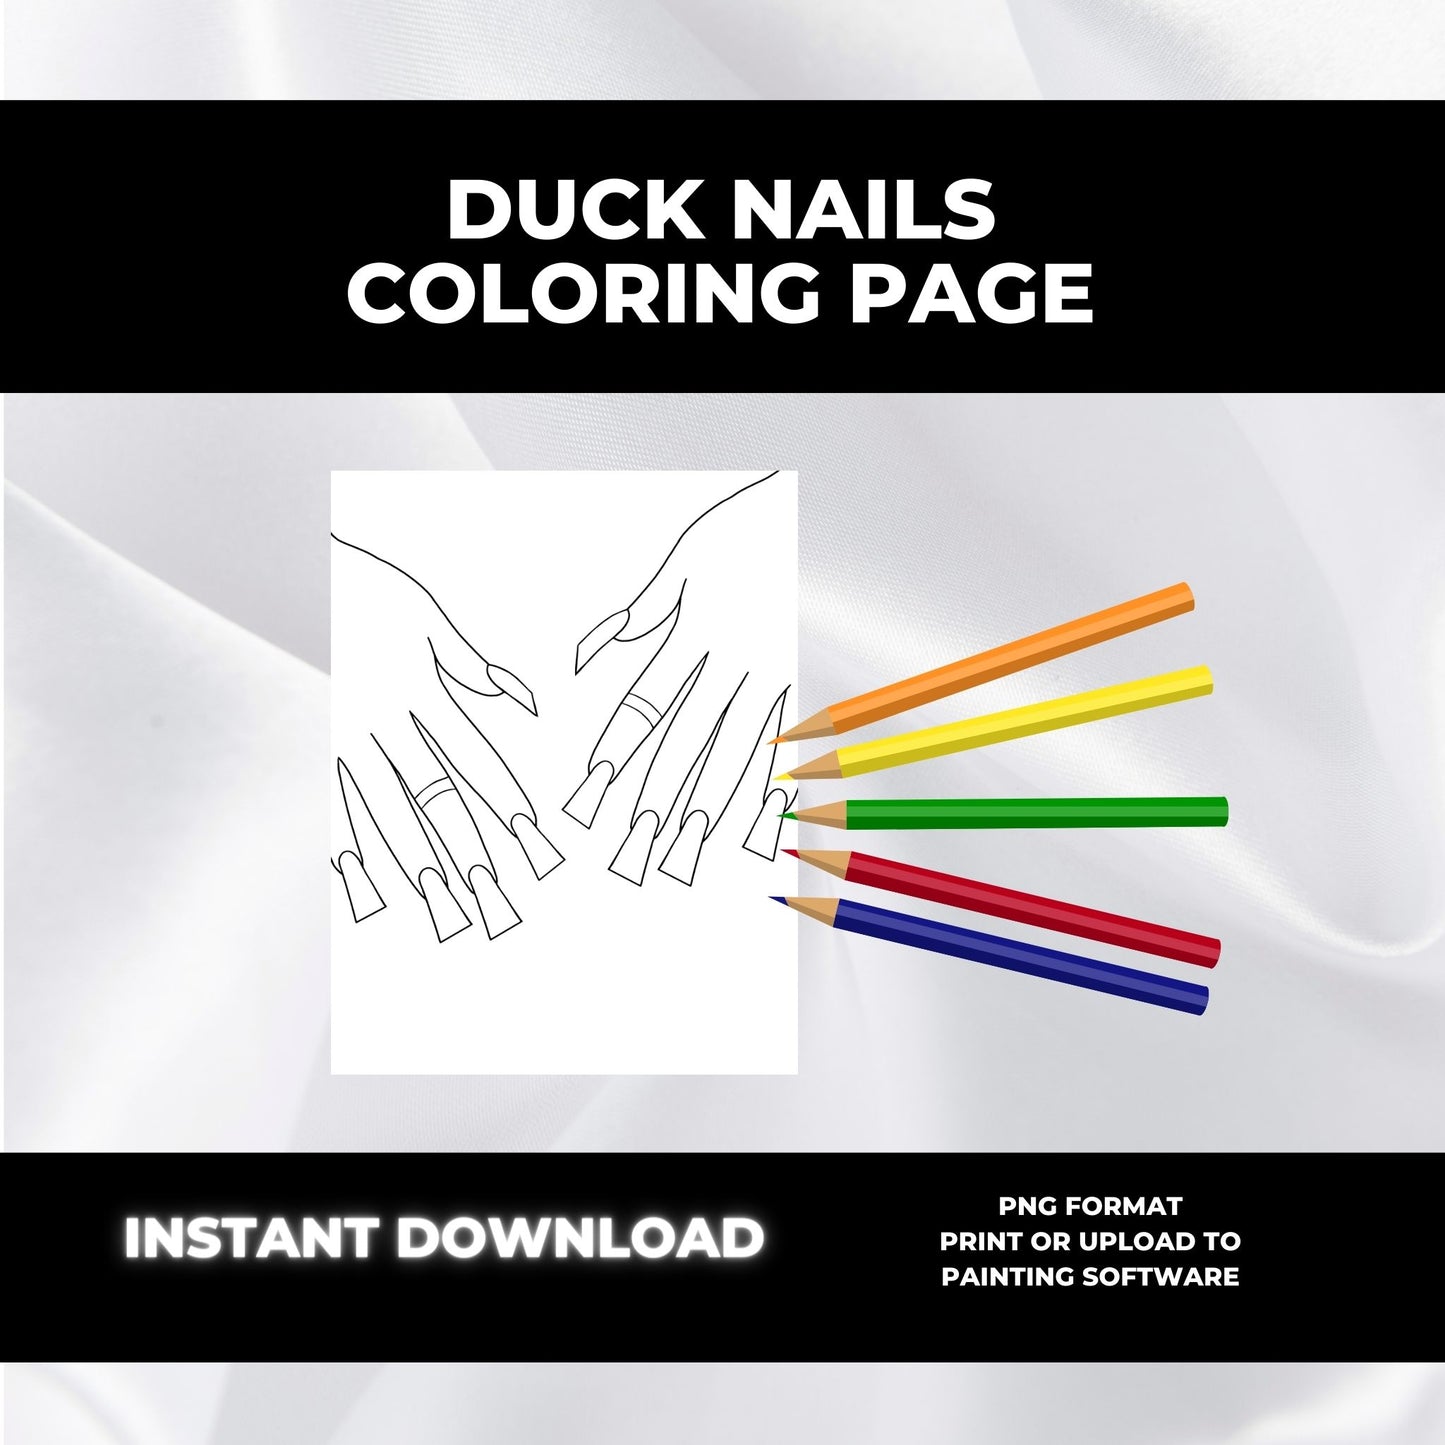 Duck Nails Coloring Page